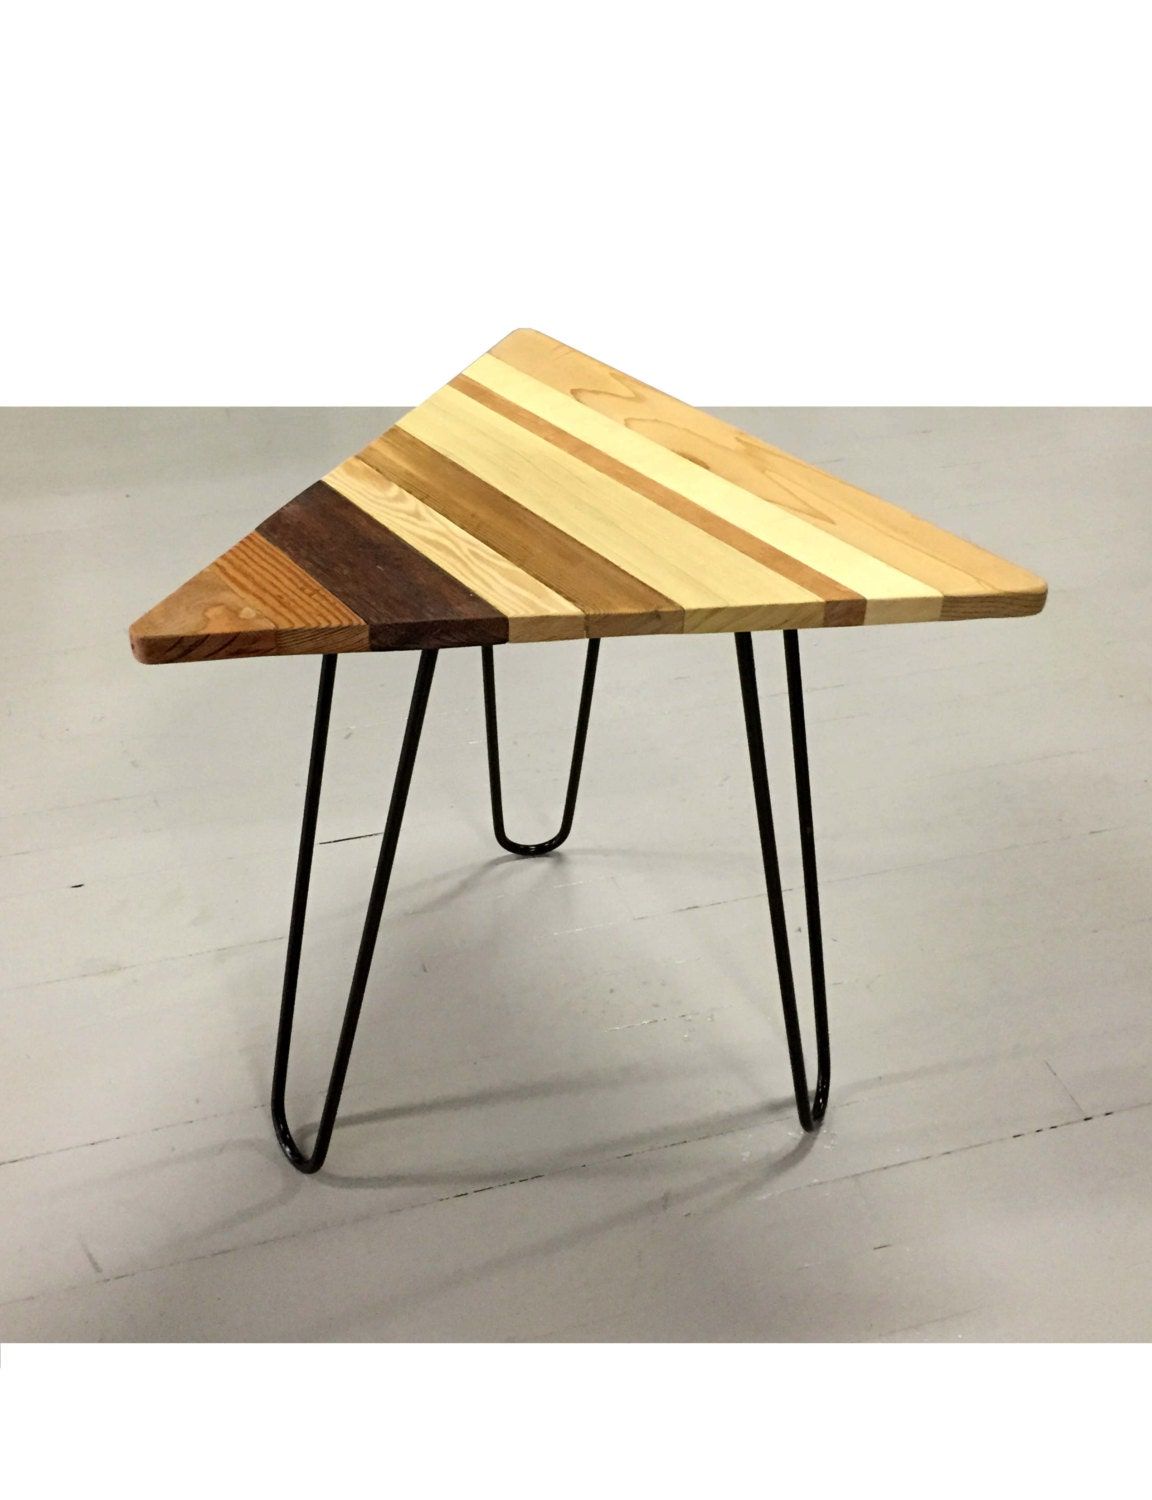 Reclaimed Wood Triangular Modern End Table Or Coffee Table For Famous Triangular Coffee Tables (View 12 of 20)